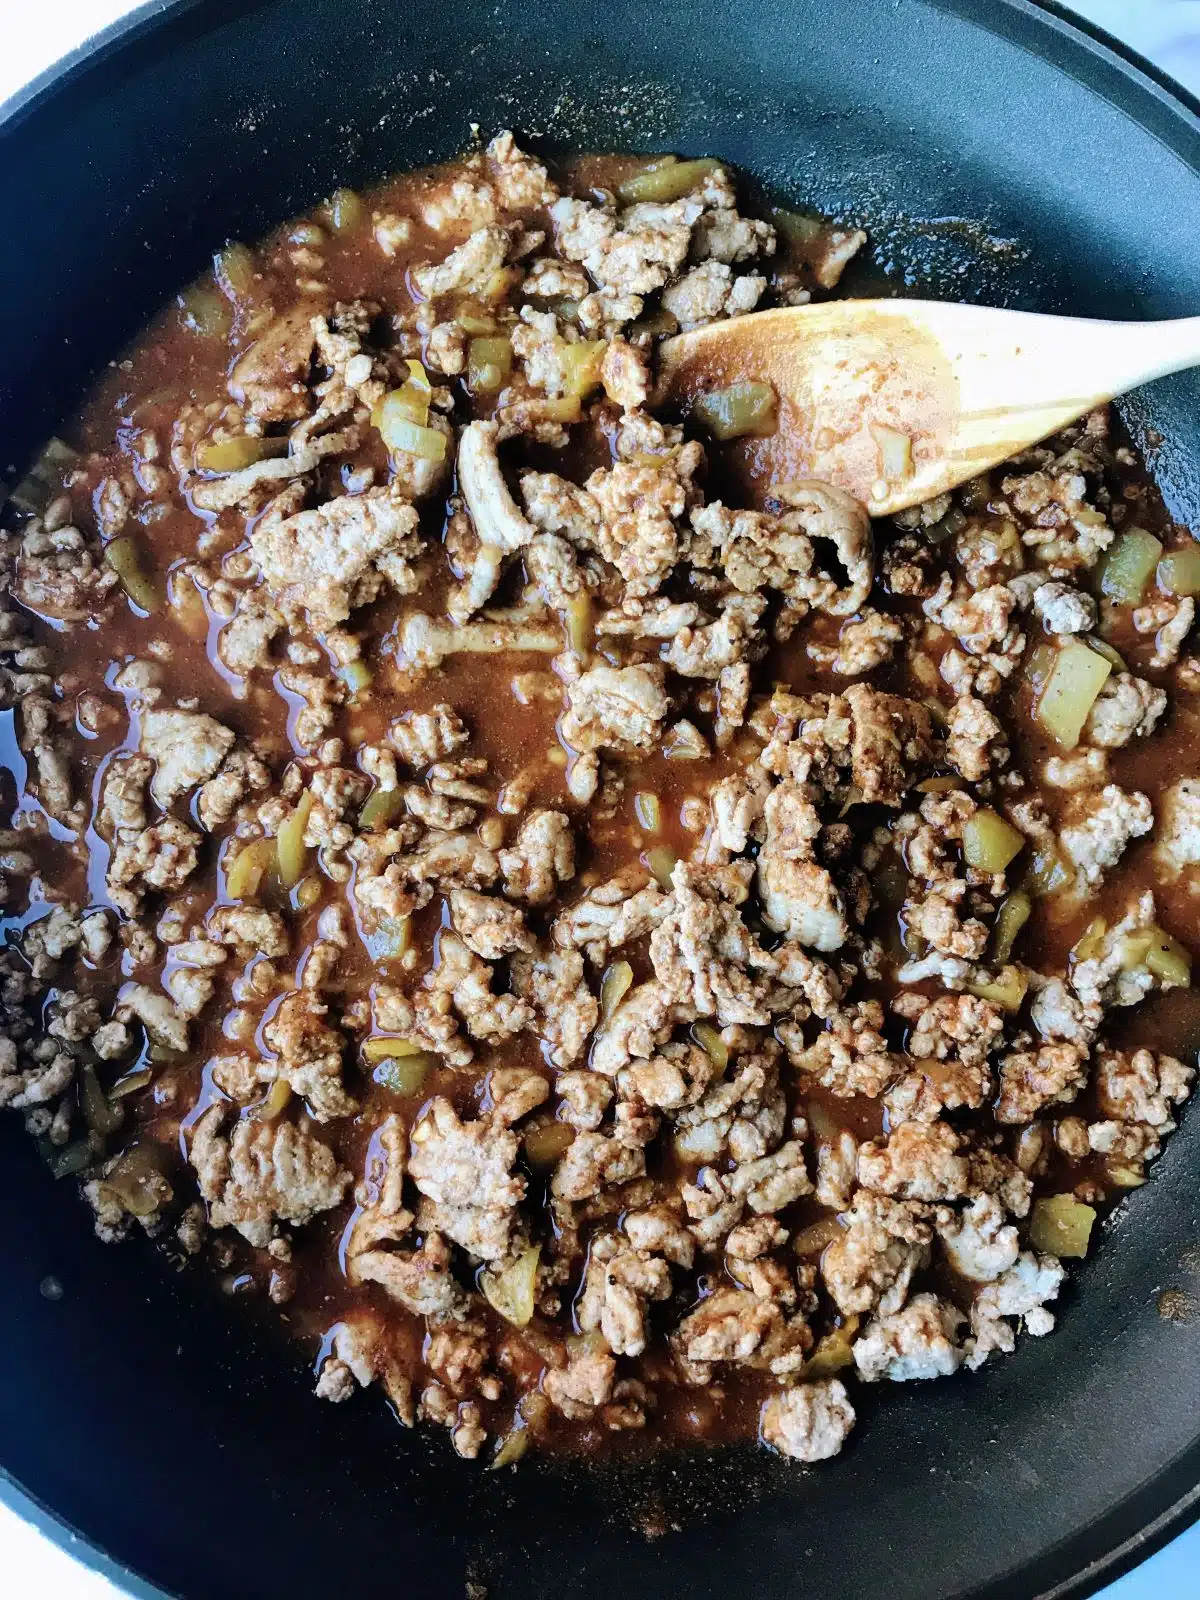 Ground turkey cooking in spices, tomato sauce, and mild green chiles.